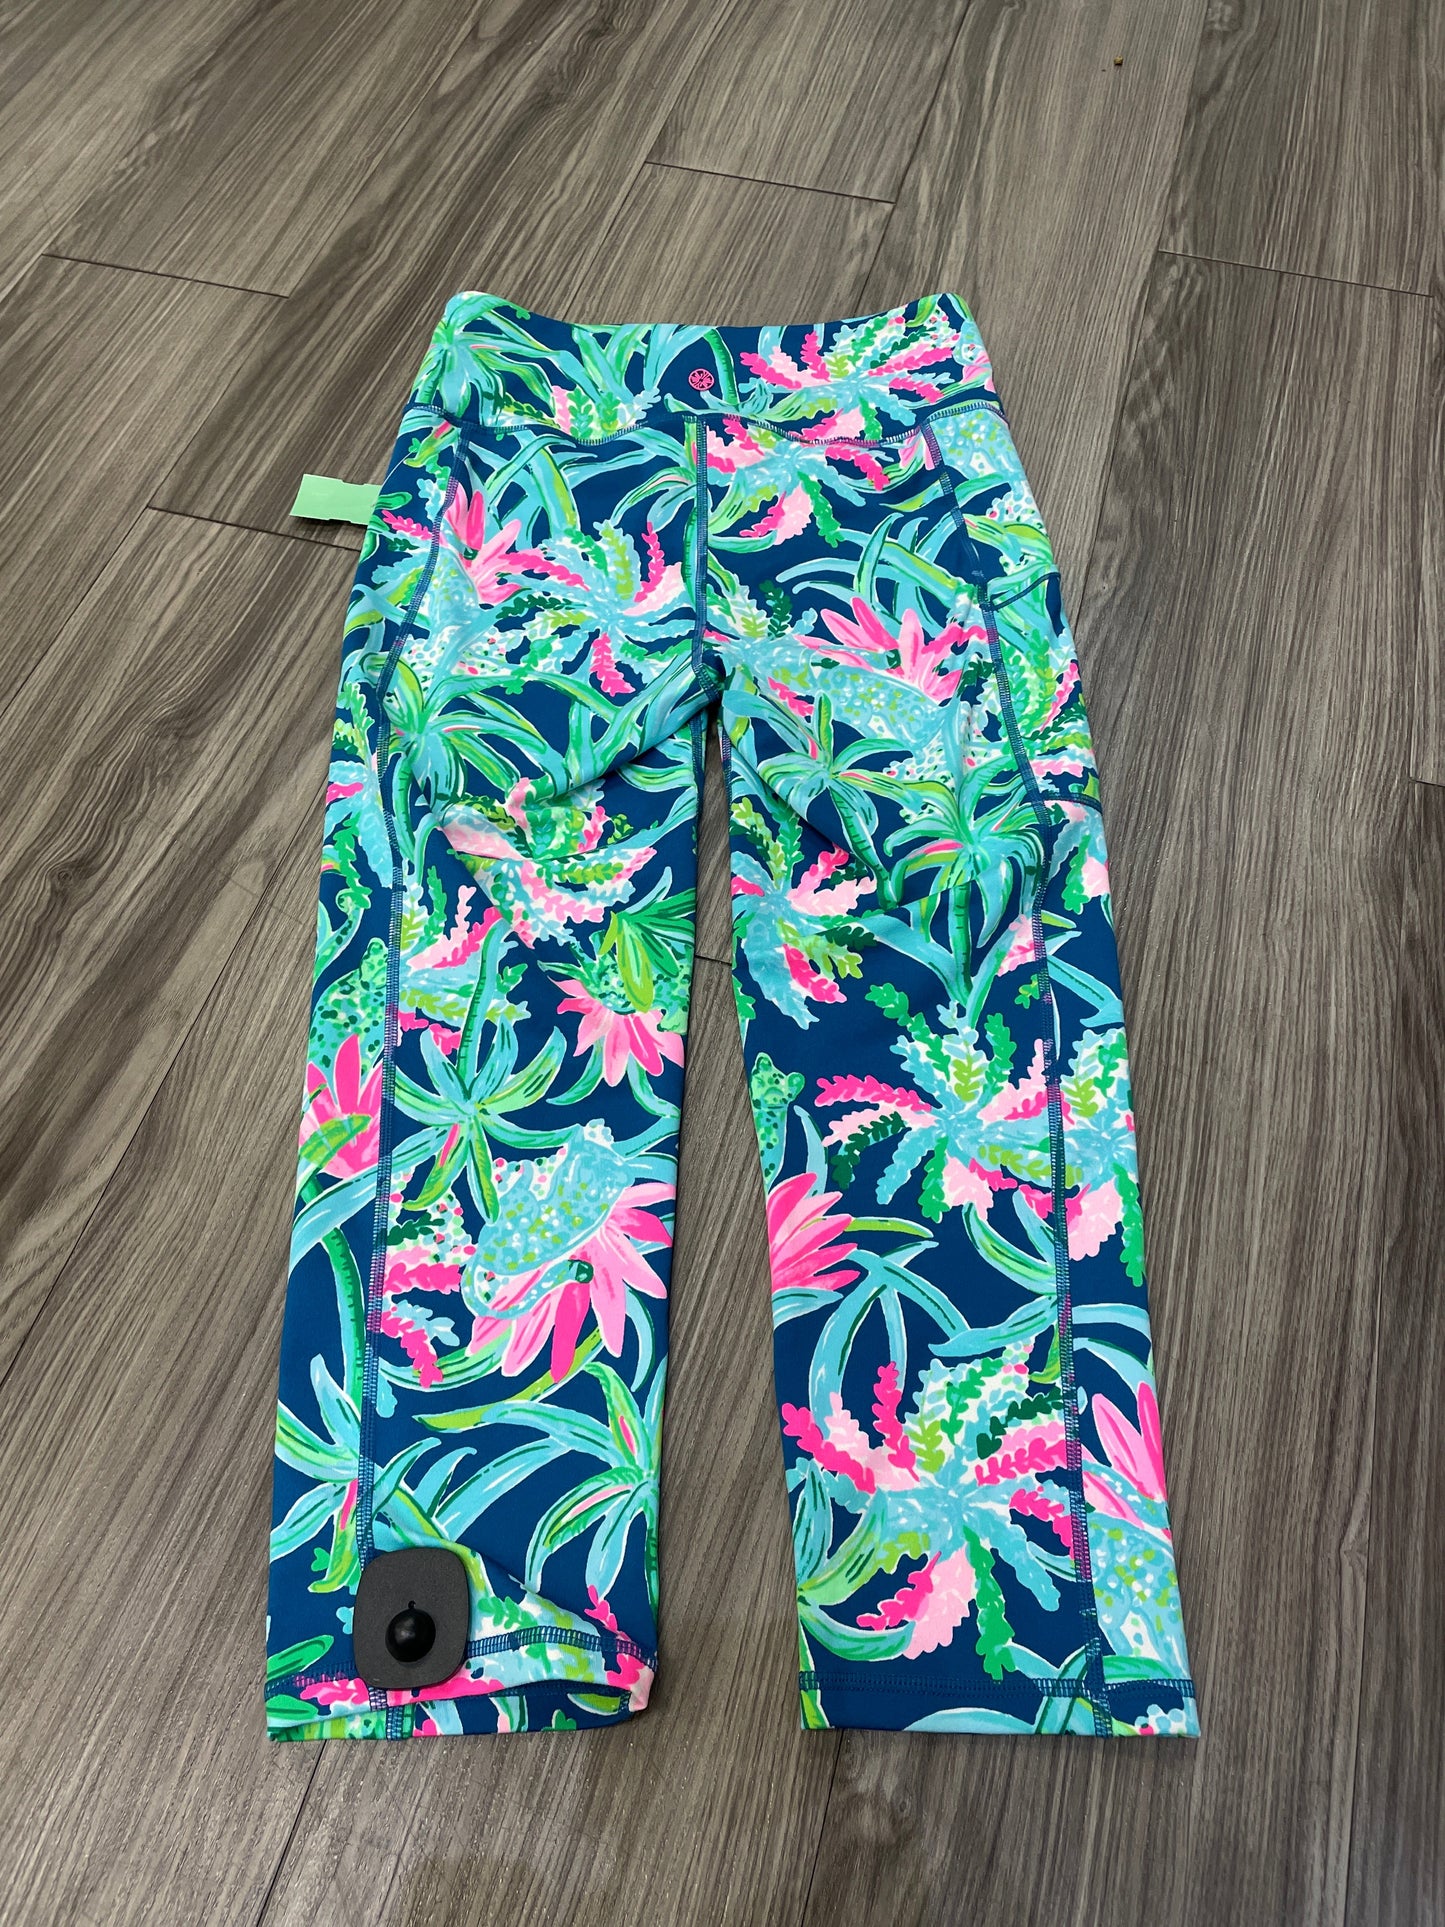 Multi-colored Athletic Leggings Lilly Pulitzer, Size M